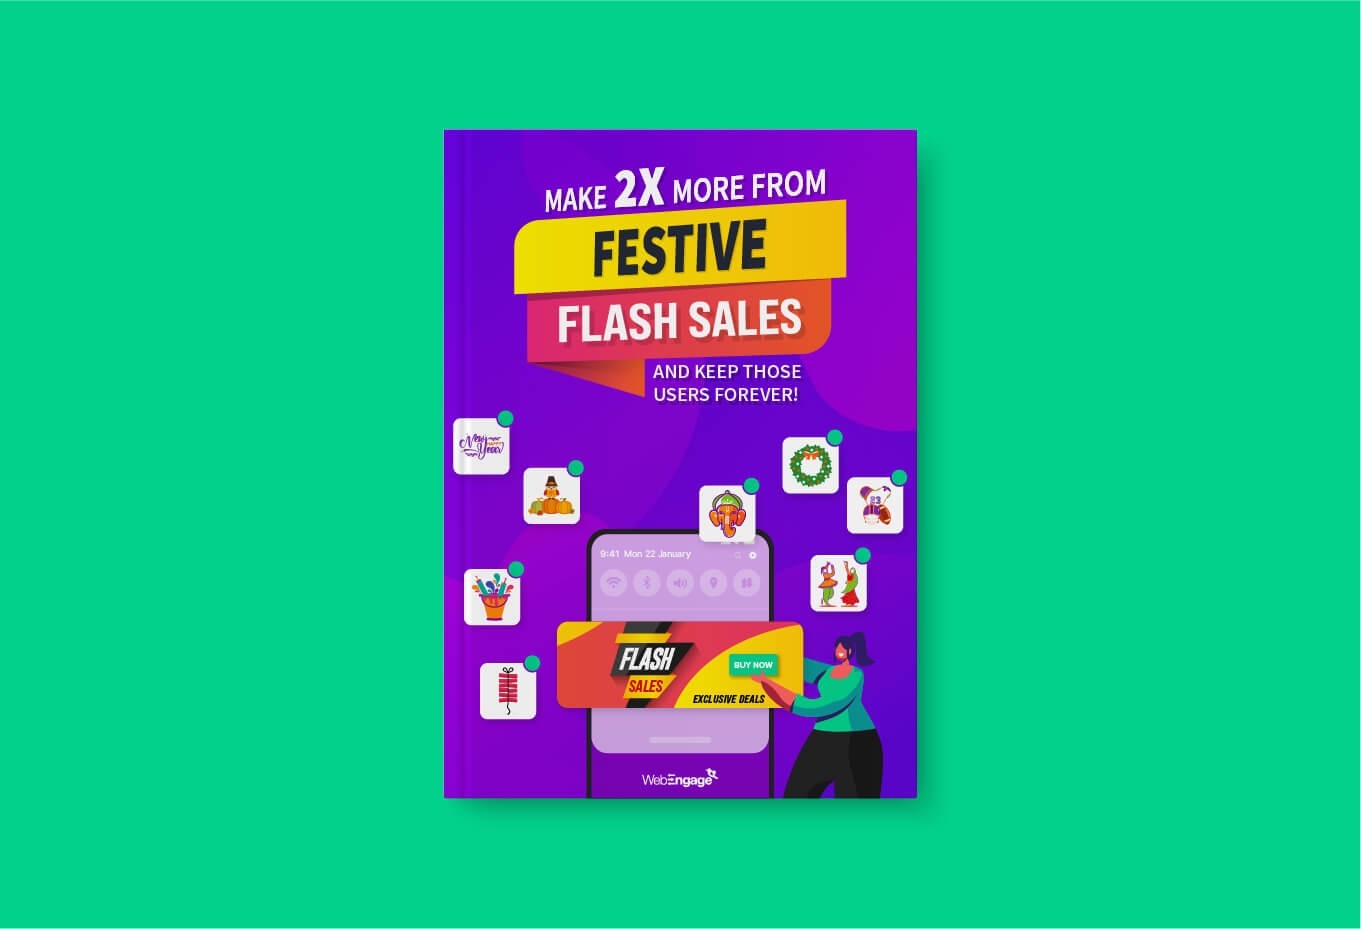 Make 2x More From Festive Flash Sales And Keep Those Users Forever!